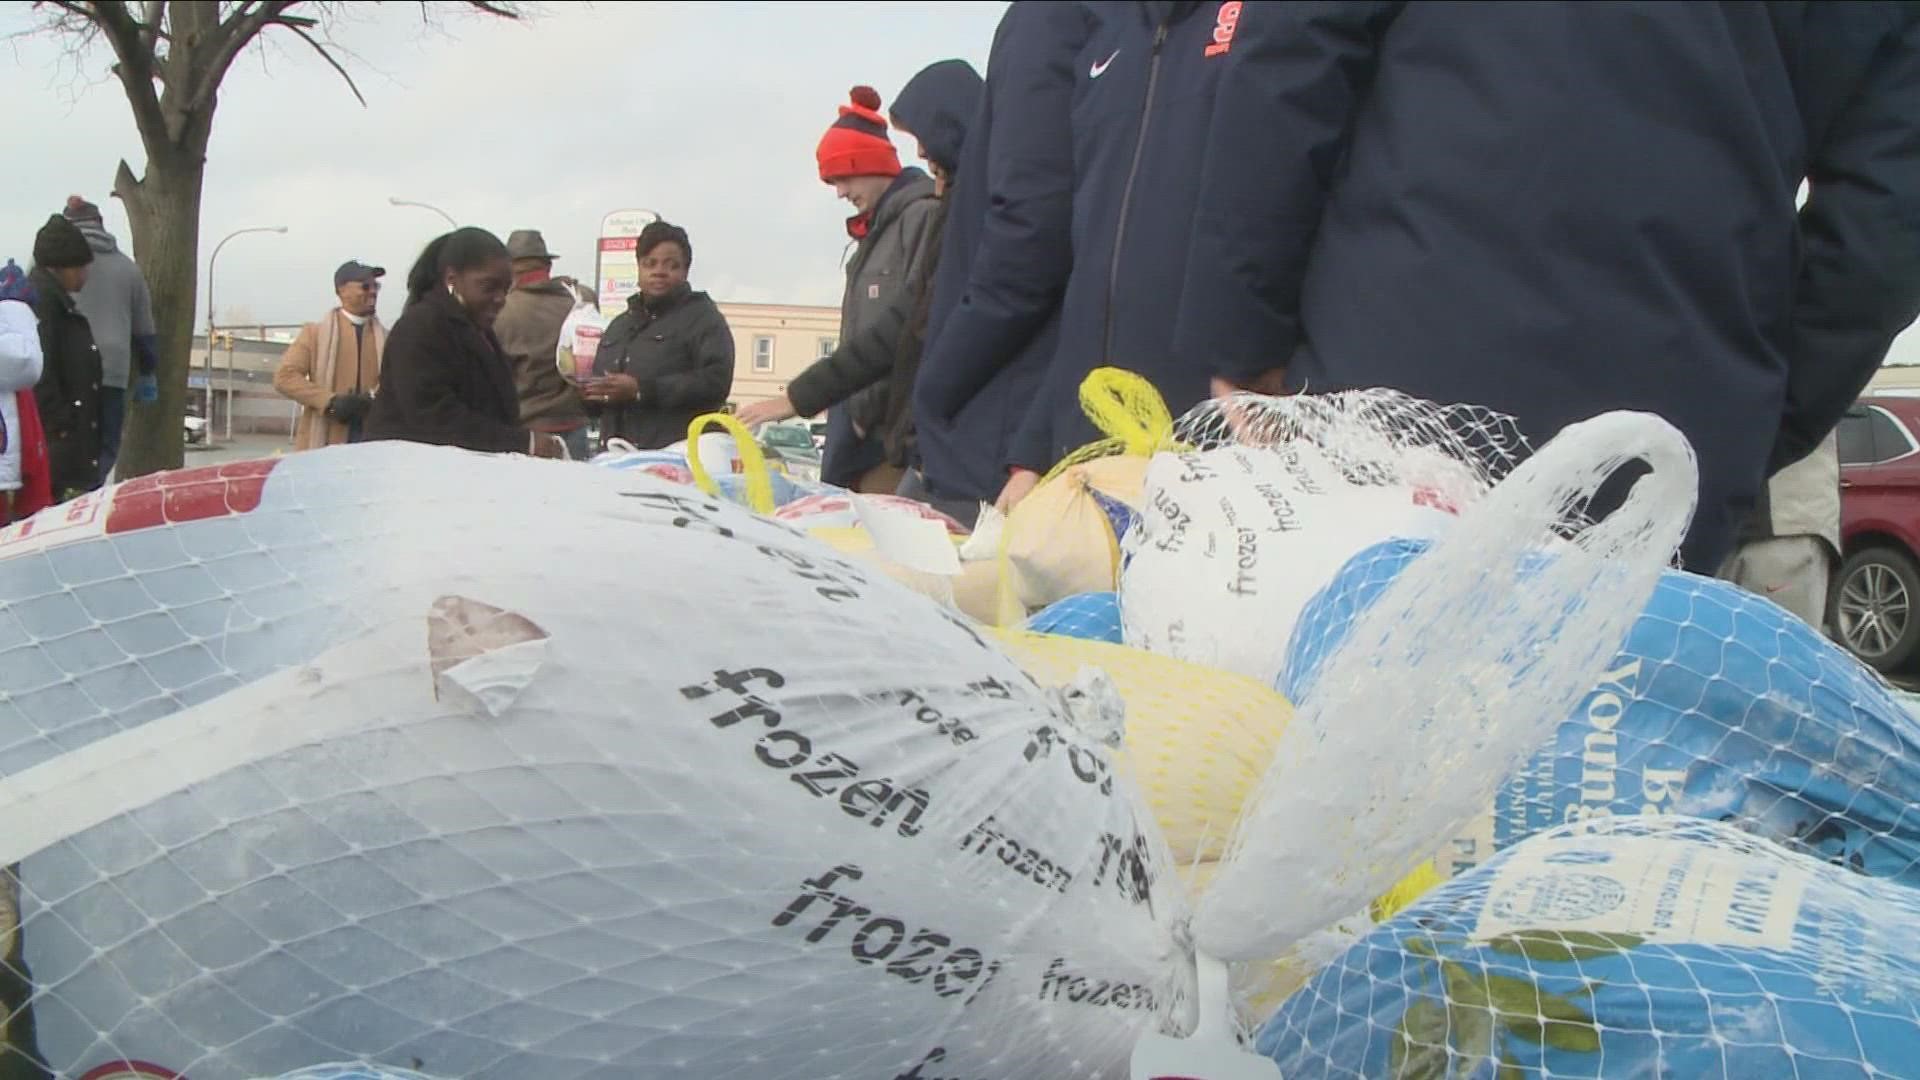 On the eve of the 6-month anniversary of the Tops shooting, students from Syracuse University traveled to Buffalo to give back ahead of the holiday season.